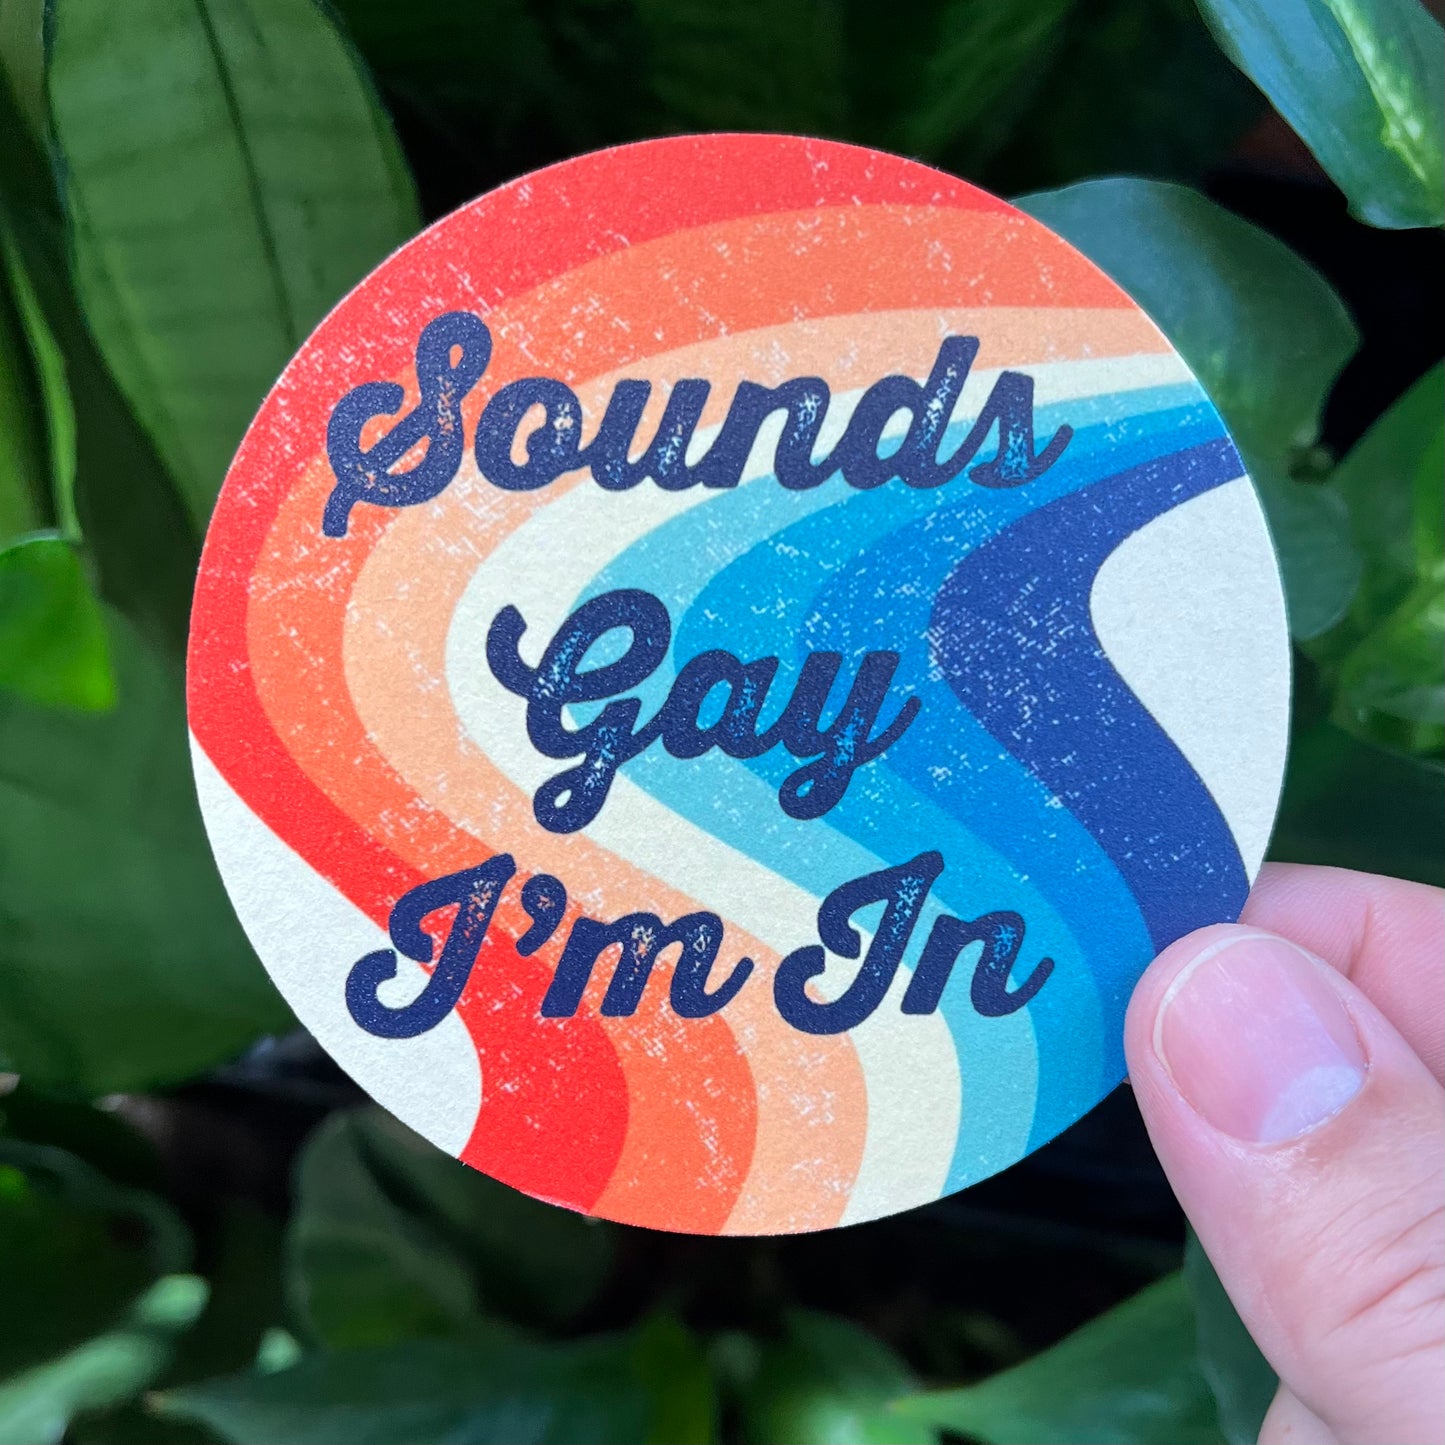 Sounds Gay I'm In Retro Rainbow - 4 Pack Paper Coasters